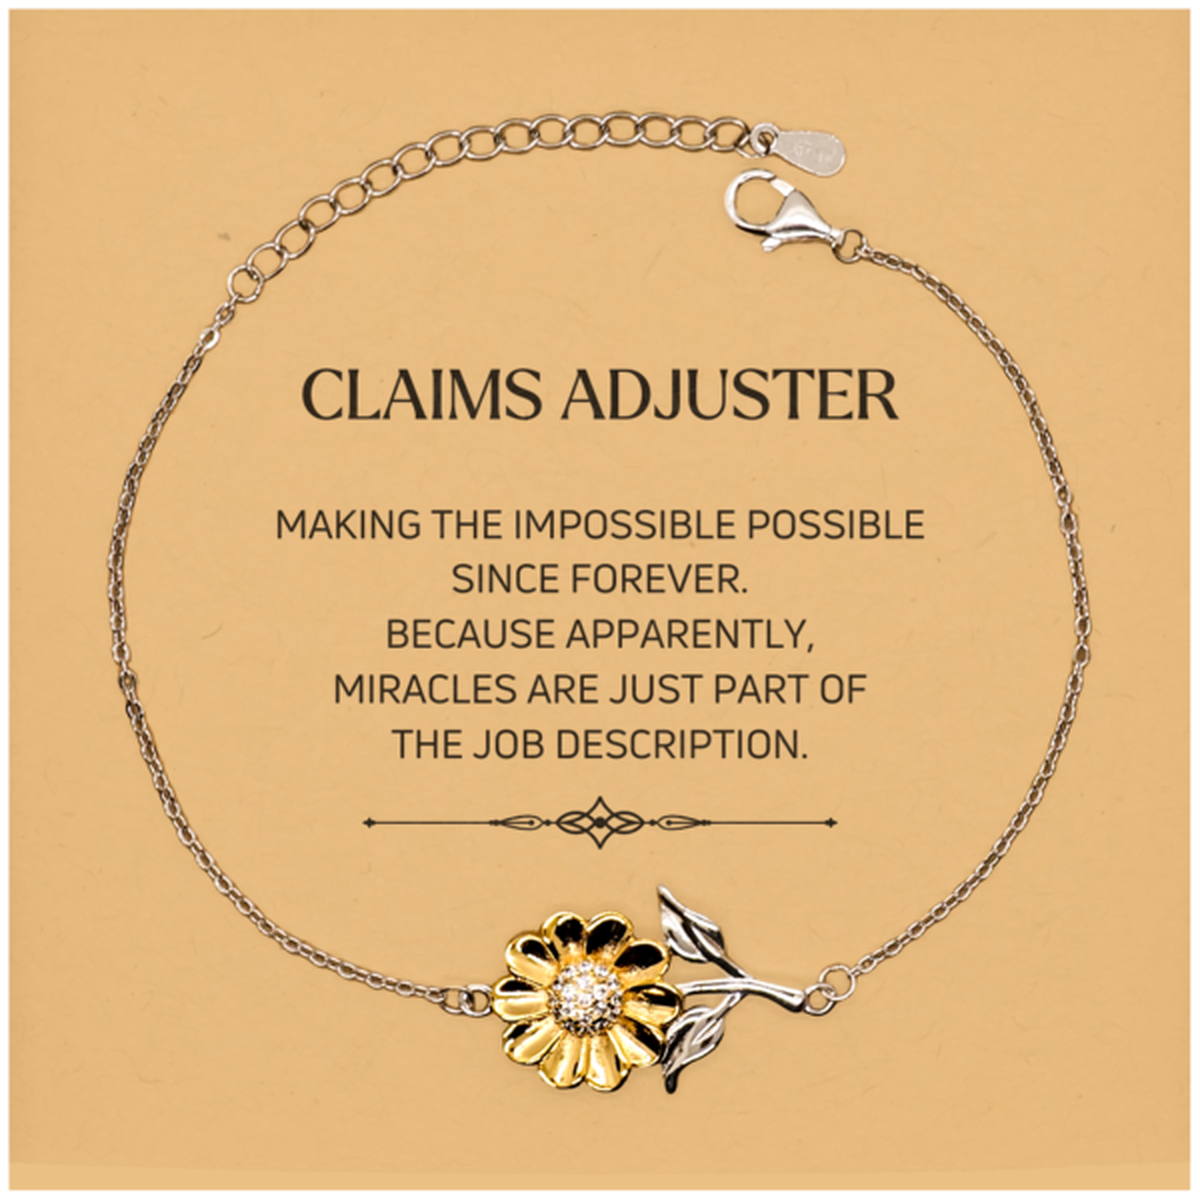 Funny Claims Adjuster Gifts, Miracles are just part of the job description, Inspirational Birthday Christmas Sunflower Bracelet For Claims Adjuster, Men, Women, Coworkers, Friends, Boss